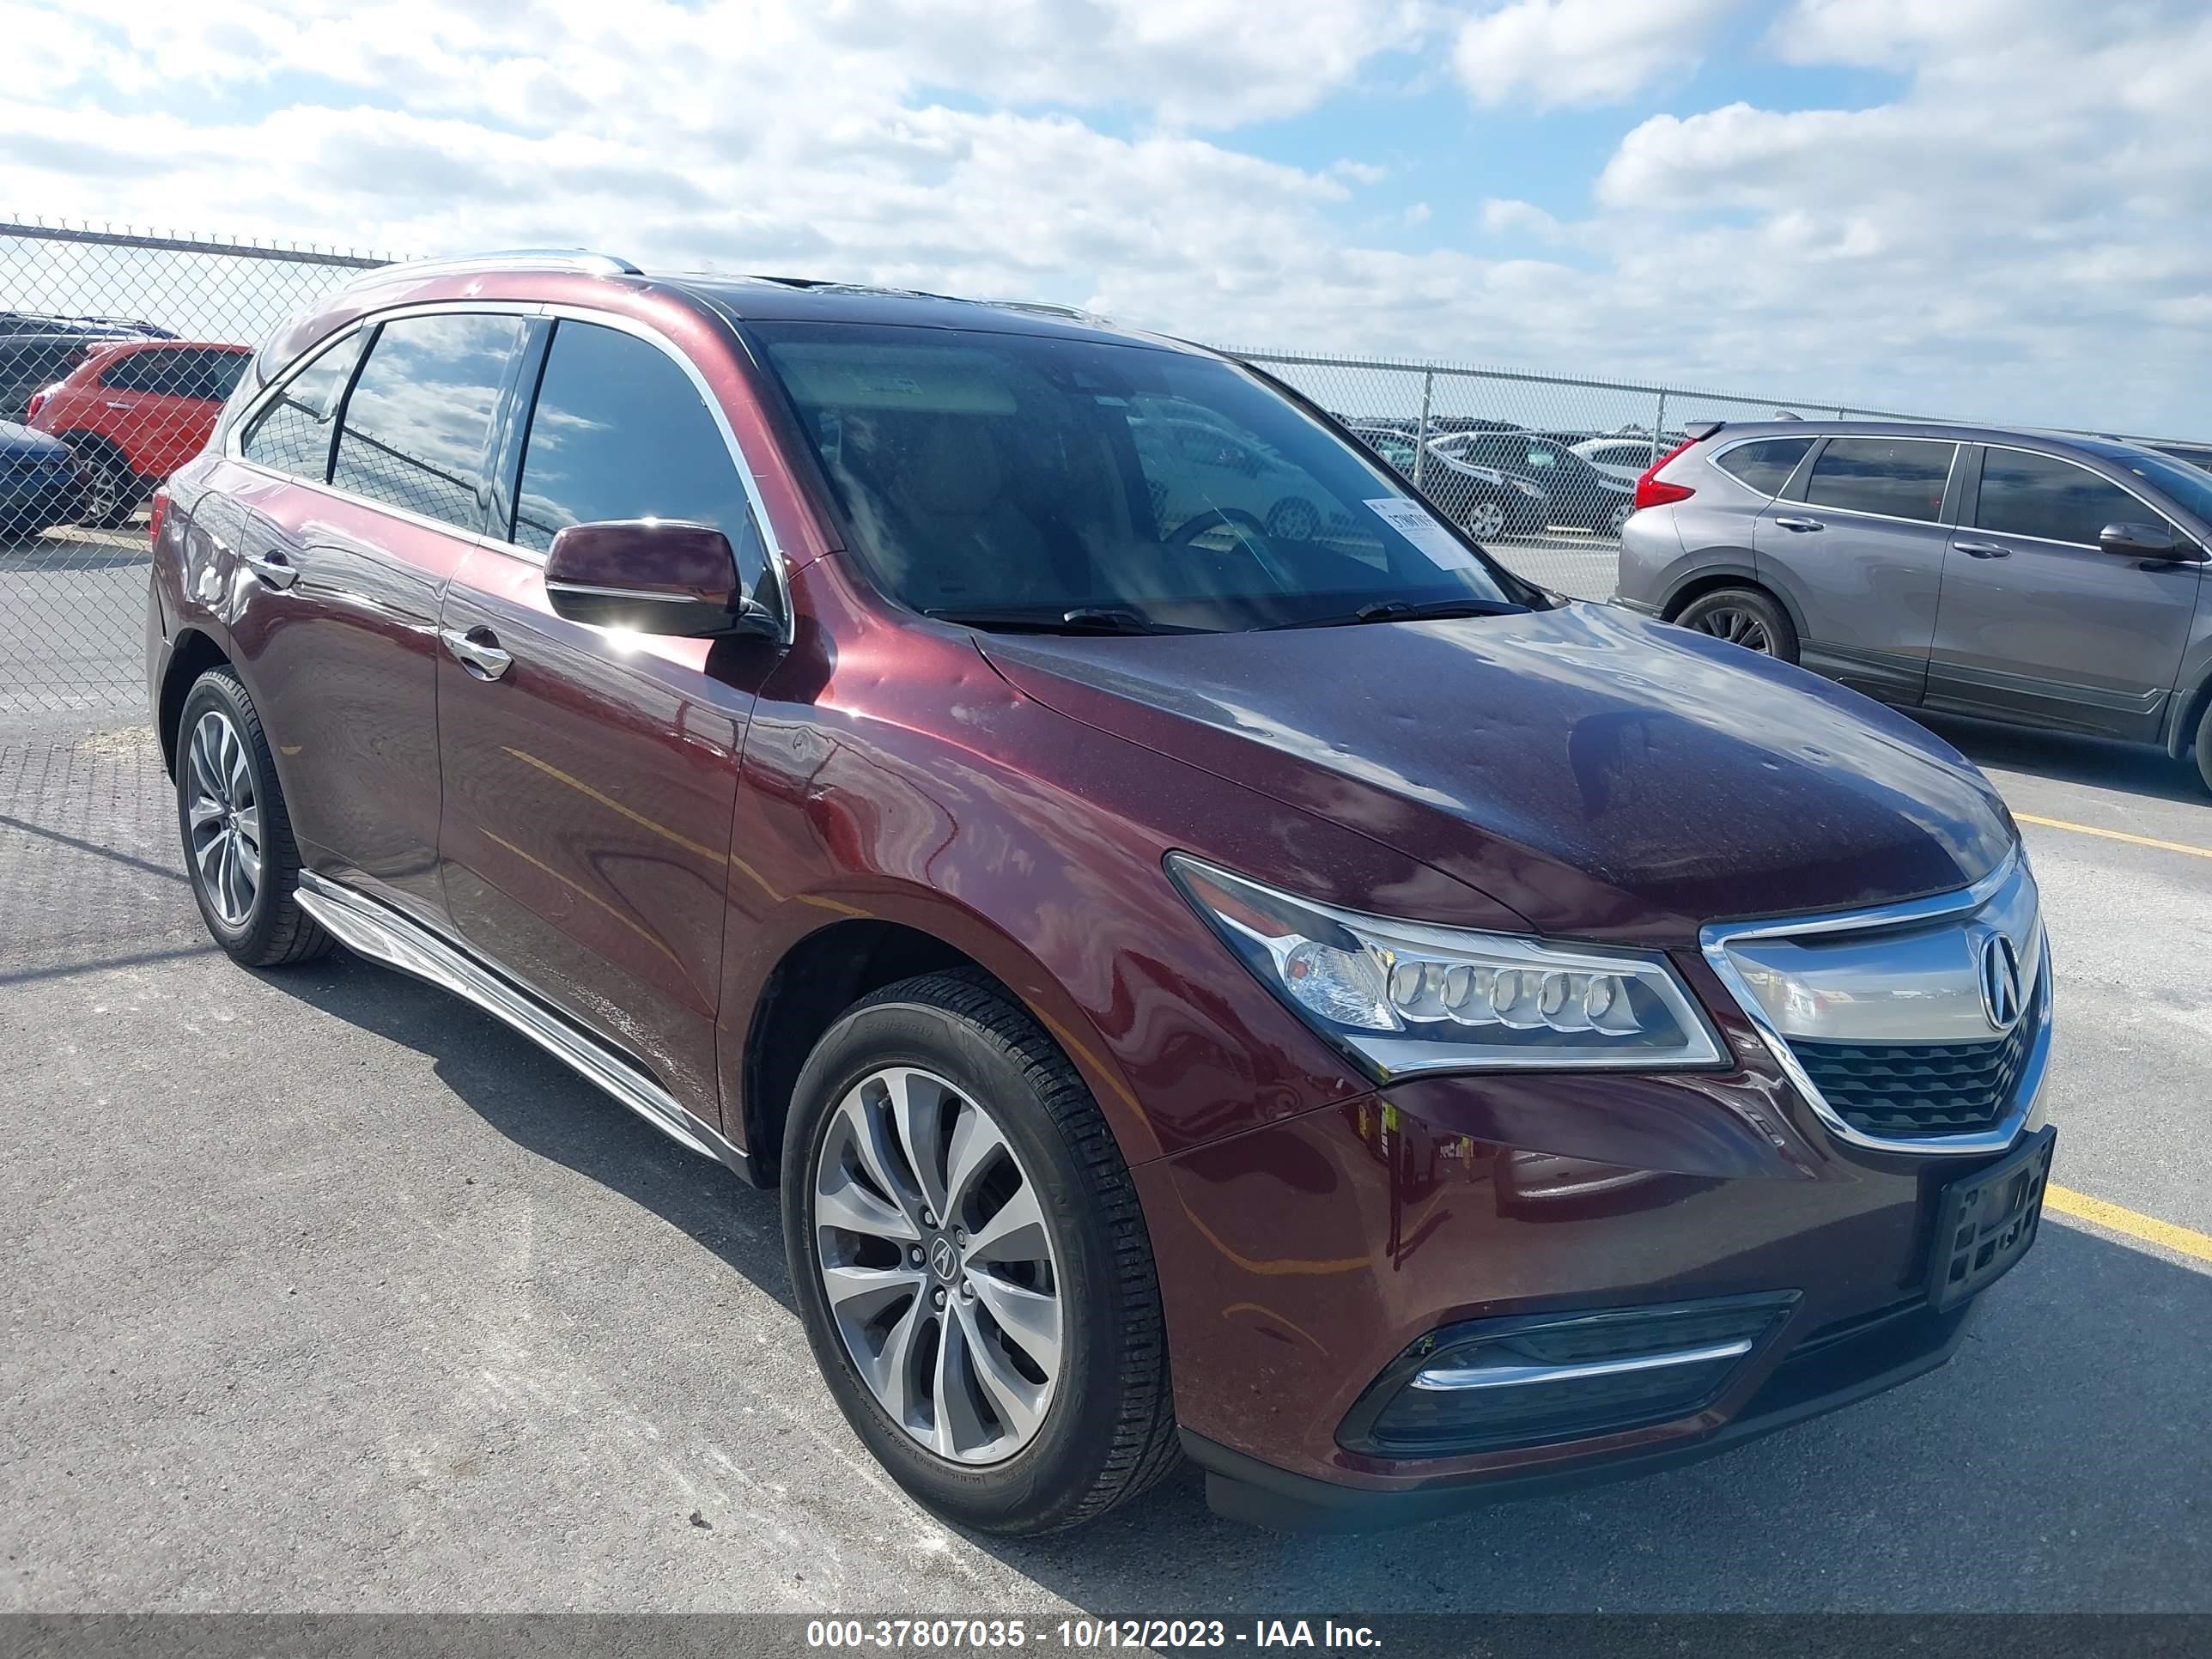 vin: 5FRYD3H65GB009319 5FRYD3H65GB009319 2016 acura mdx 3500 for Sale in 76527, 23010 Firefly Rd, Florence, Texas, USA